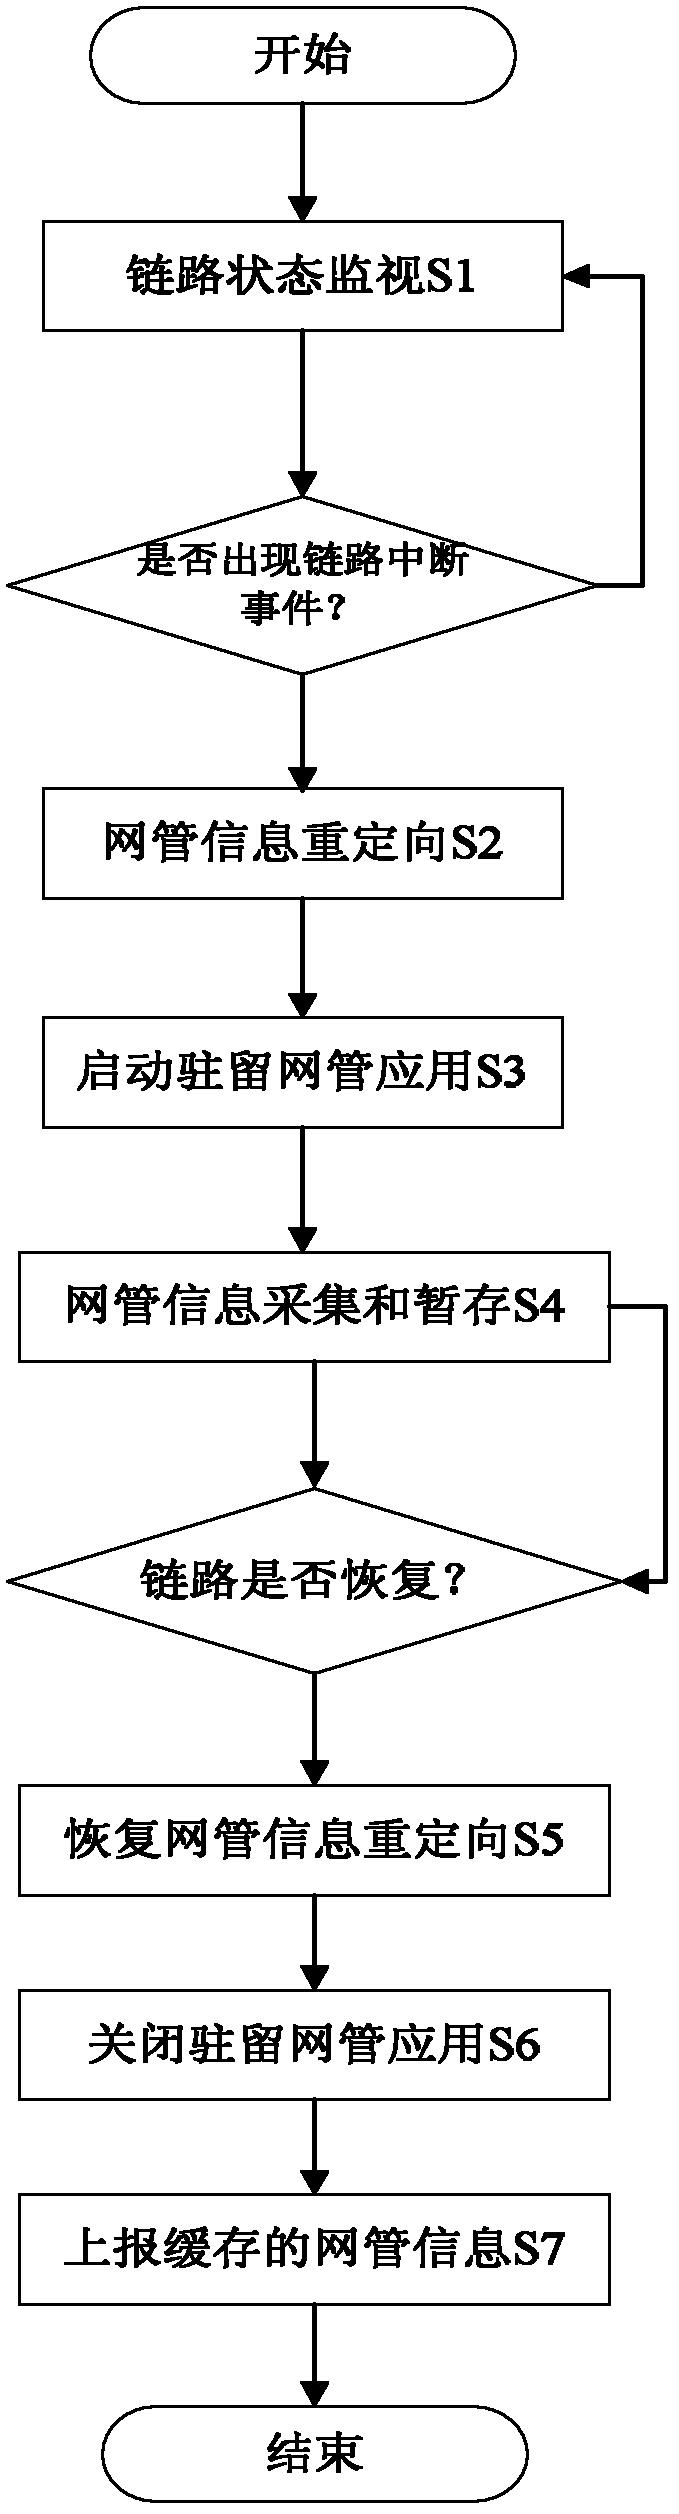 Emergency control method and system for hierarchical network management system